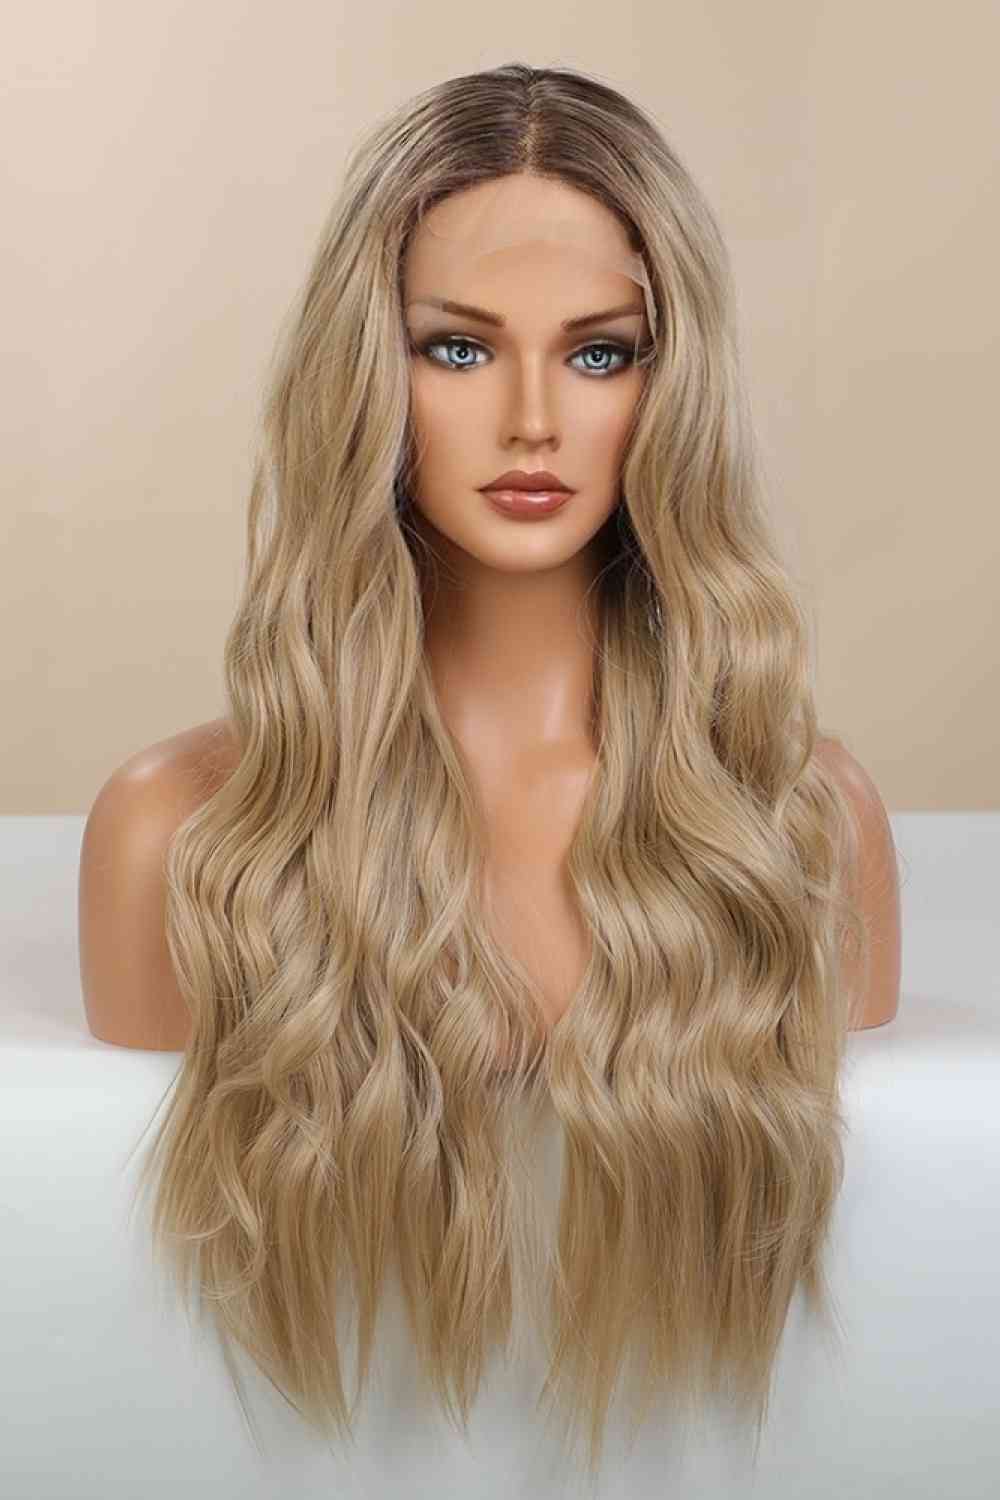 13*2" Lace Front Wigs Synthetic Long Wave 26'' 150% Density Light Brown/Blonde Ombre One Size 